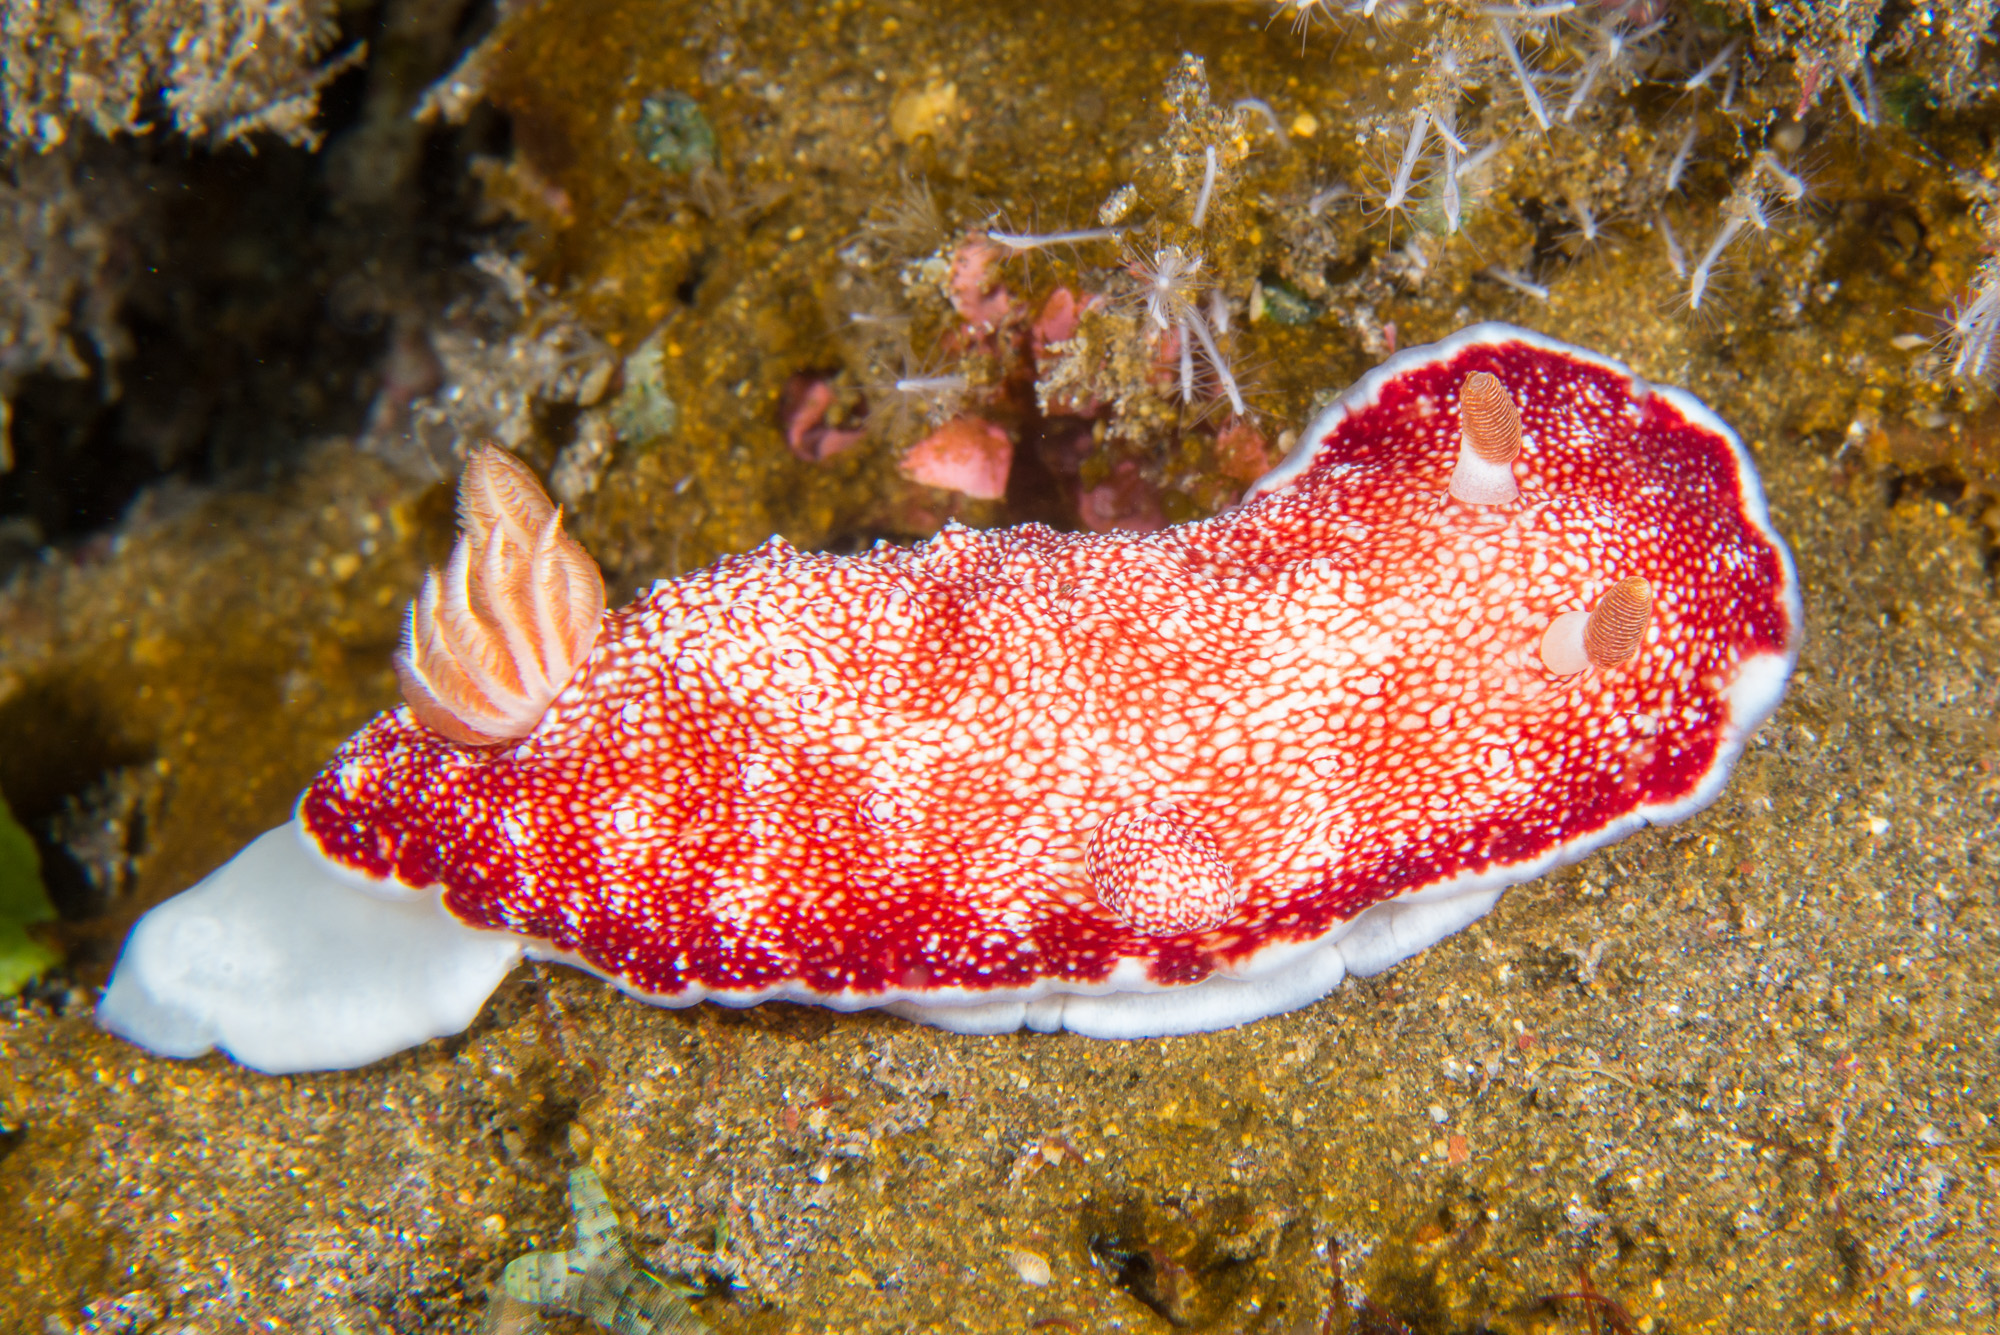 A nudibranch, a little mollusc shaped like a long pancake, colored red on top and white on the bottom.